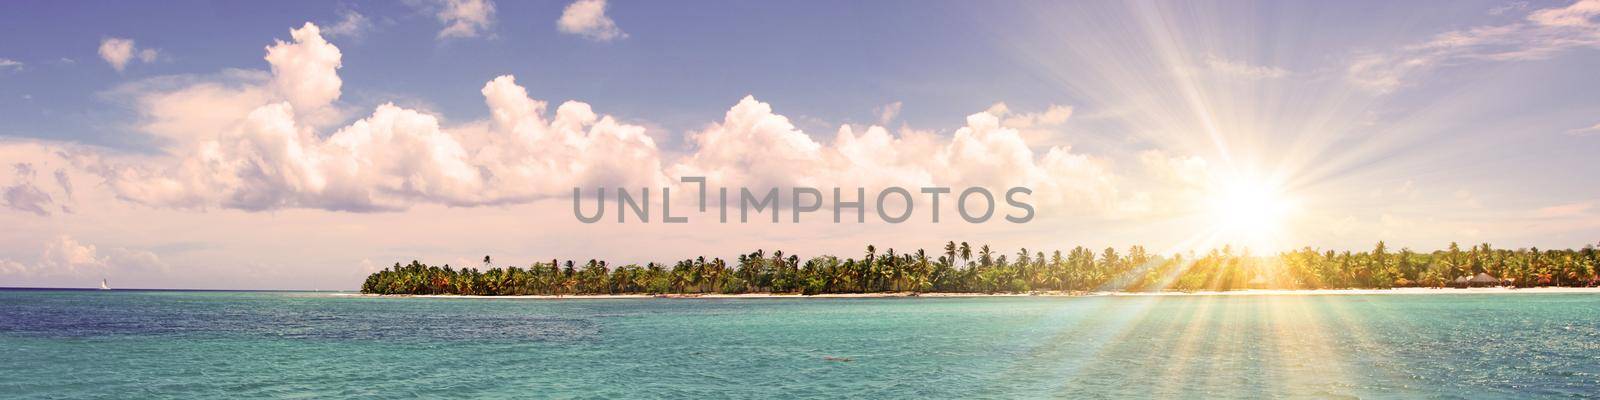 Tropical island with palms and beach panorama as background by Taut